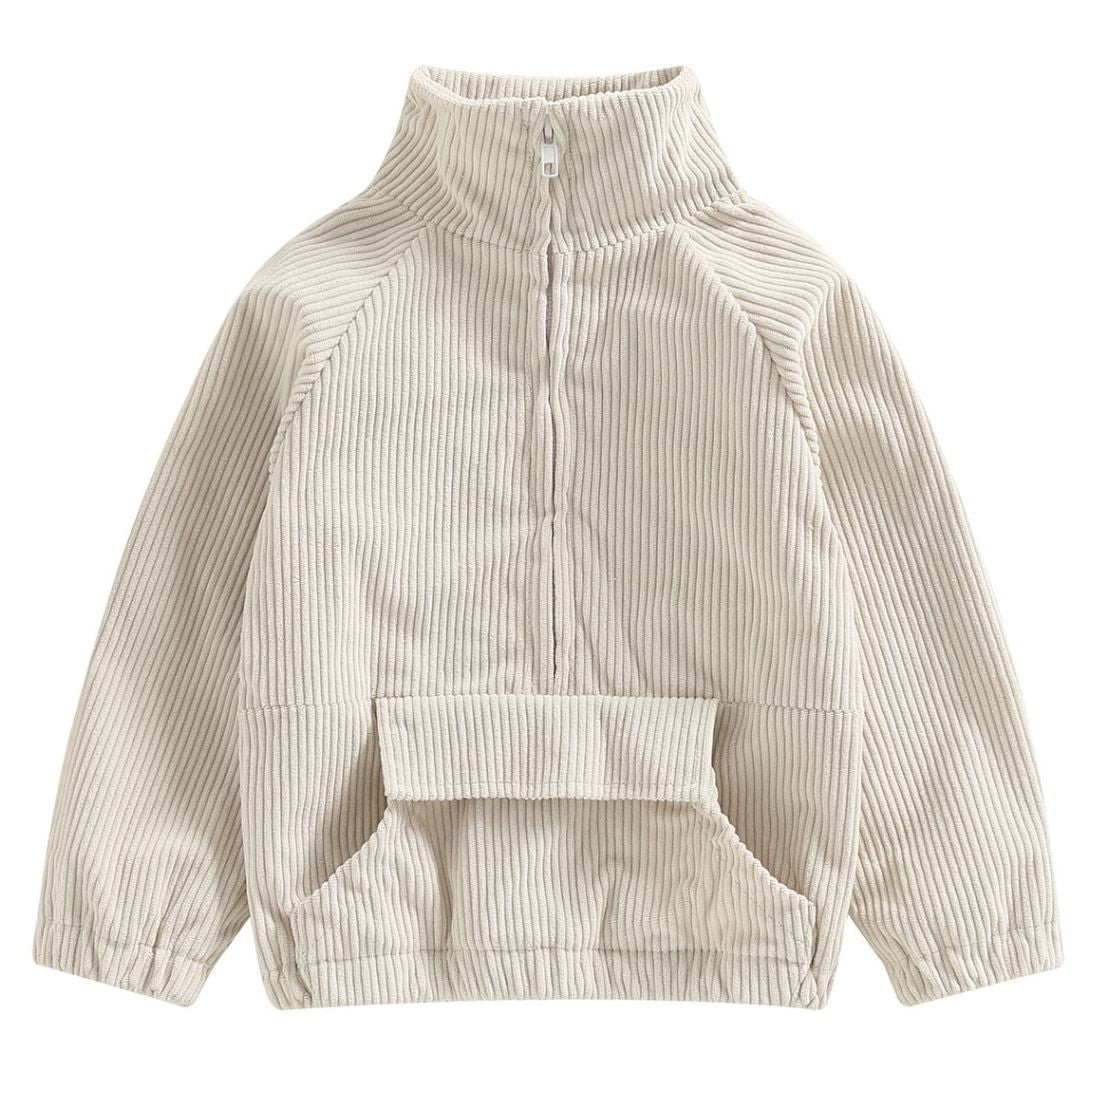 Baby Boys Corduroy Pocket Pullover - My Trendy Youngsters | Buy on-trend and stylish Baby and Toddler Winter Threads @ My Trendy Youngsters - Dress your little one in Style @ My Trendy Youngsters